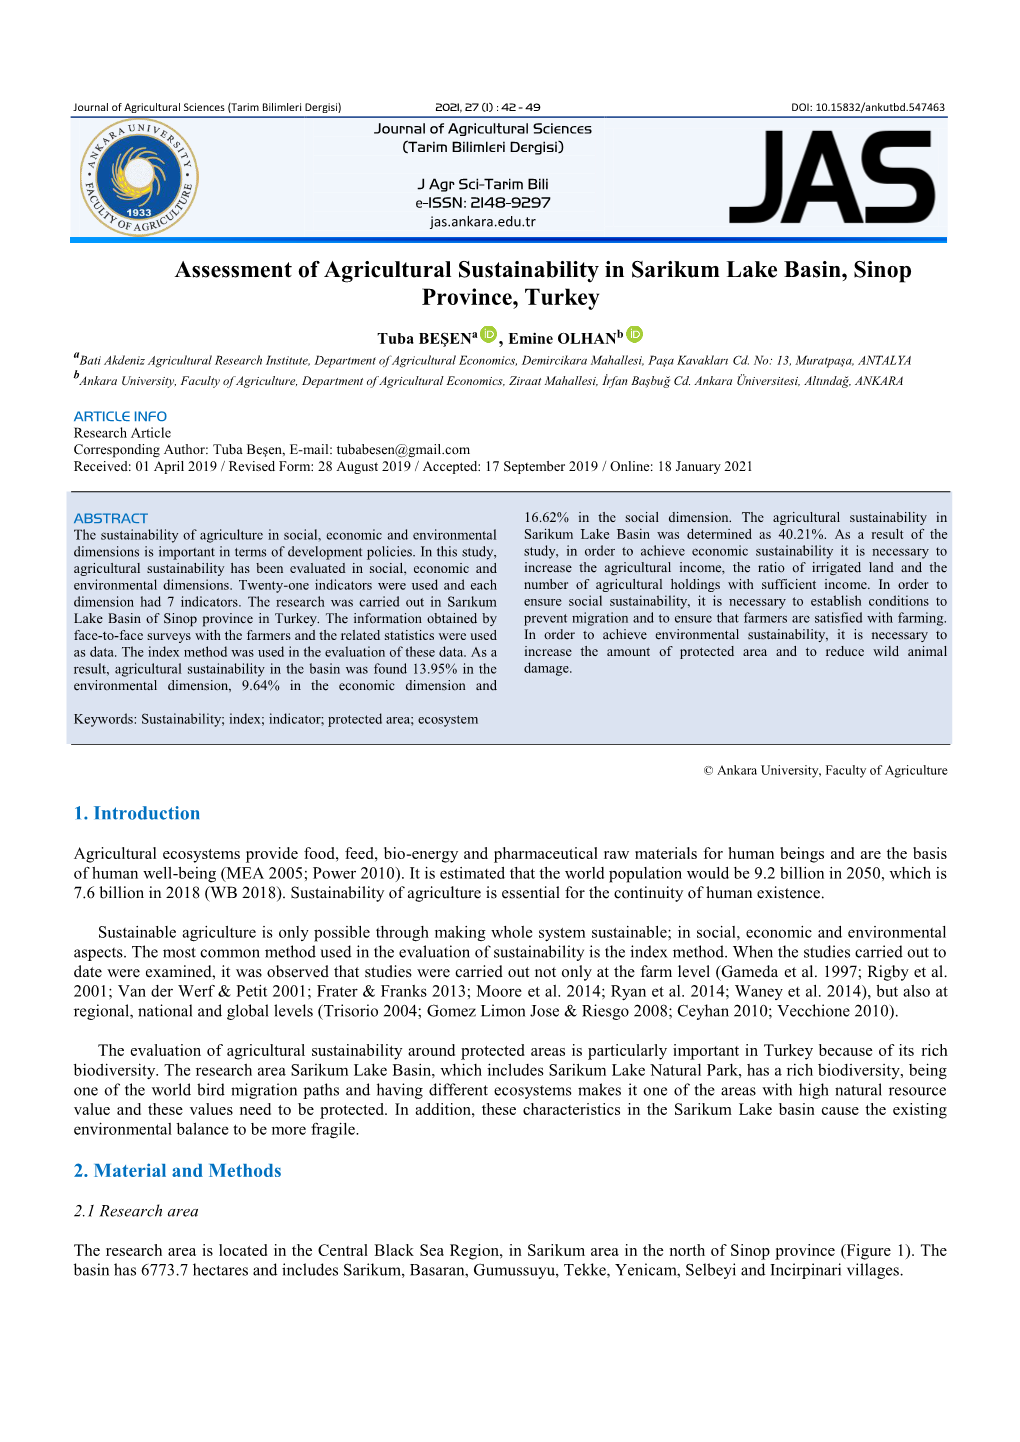 Assessment of Agricultural Sustainability in Sarikum Lake Basin, Sinop Province, Turkey